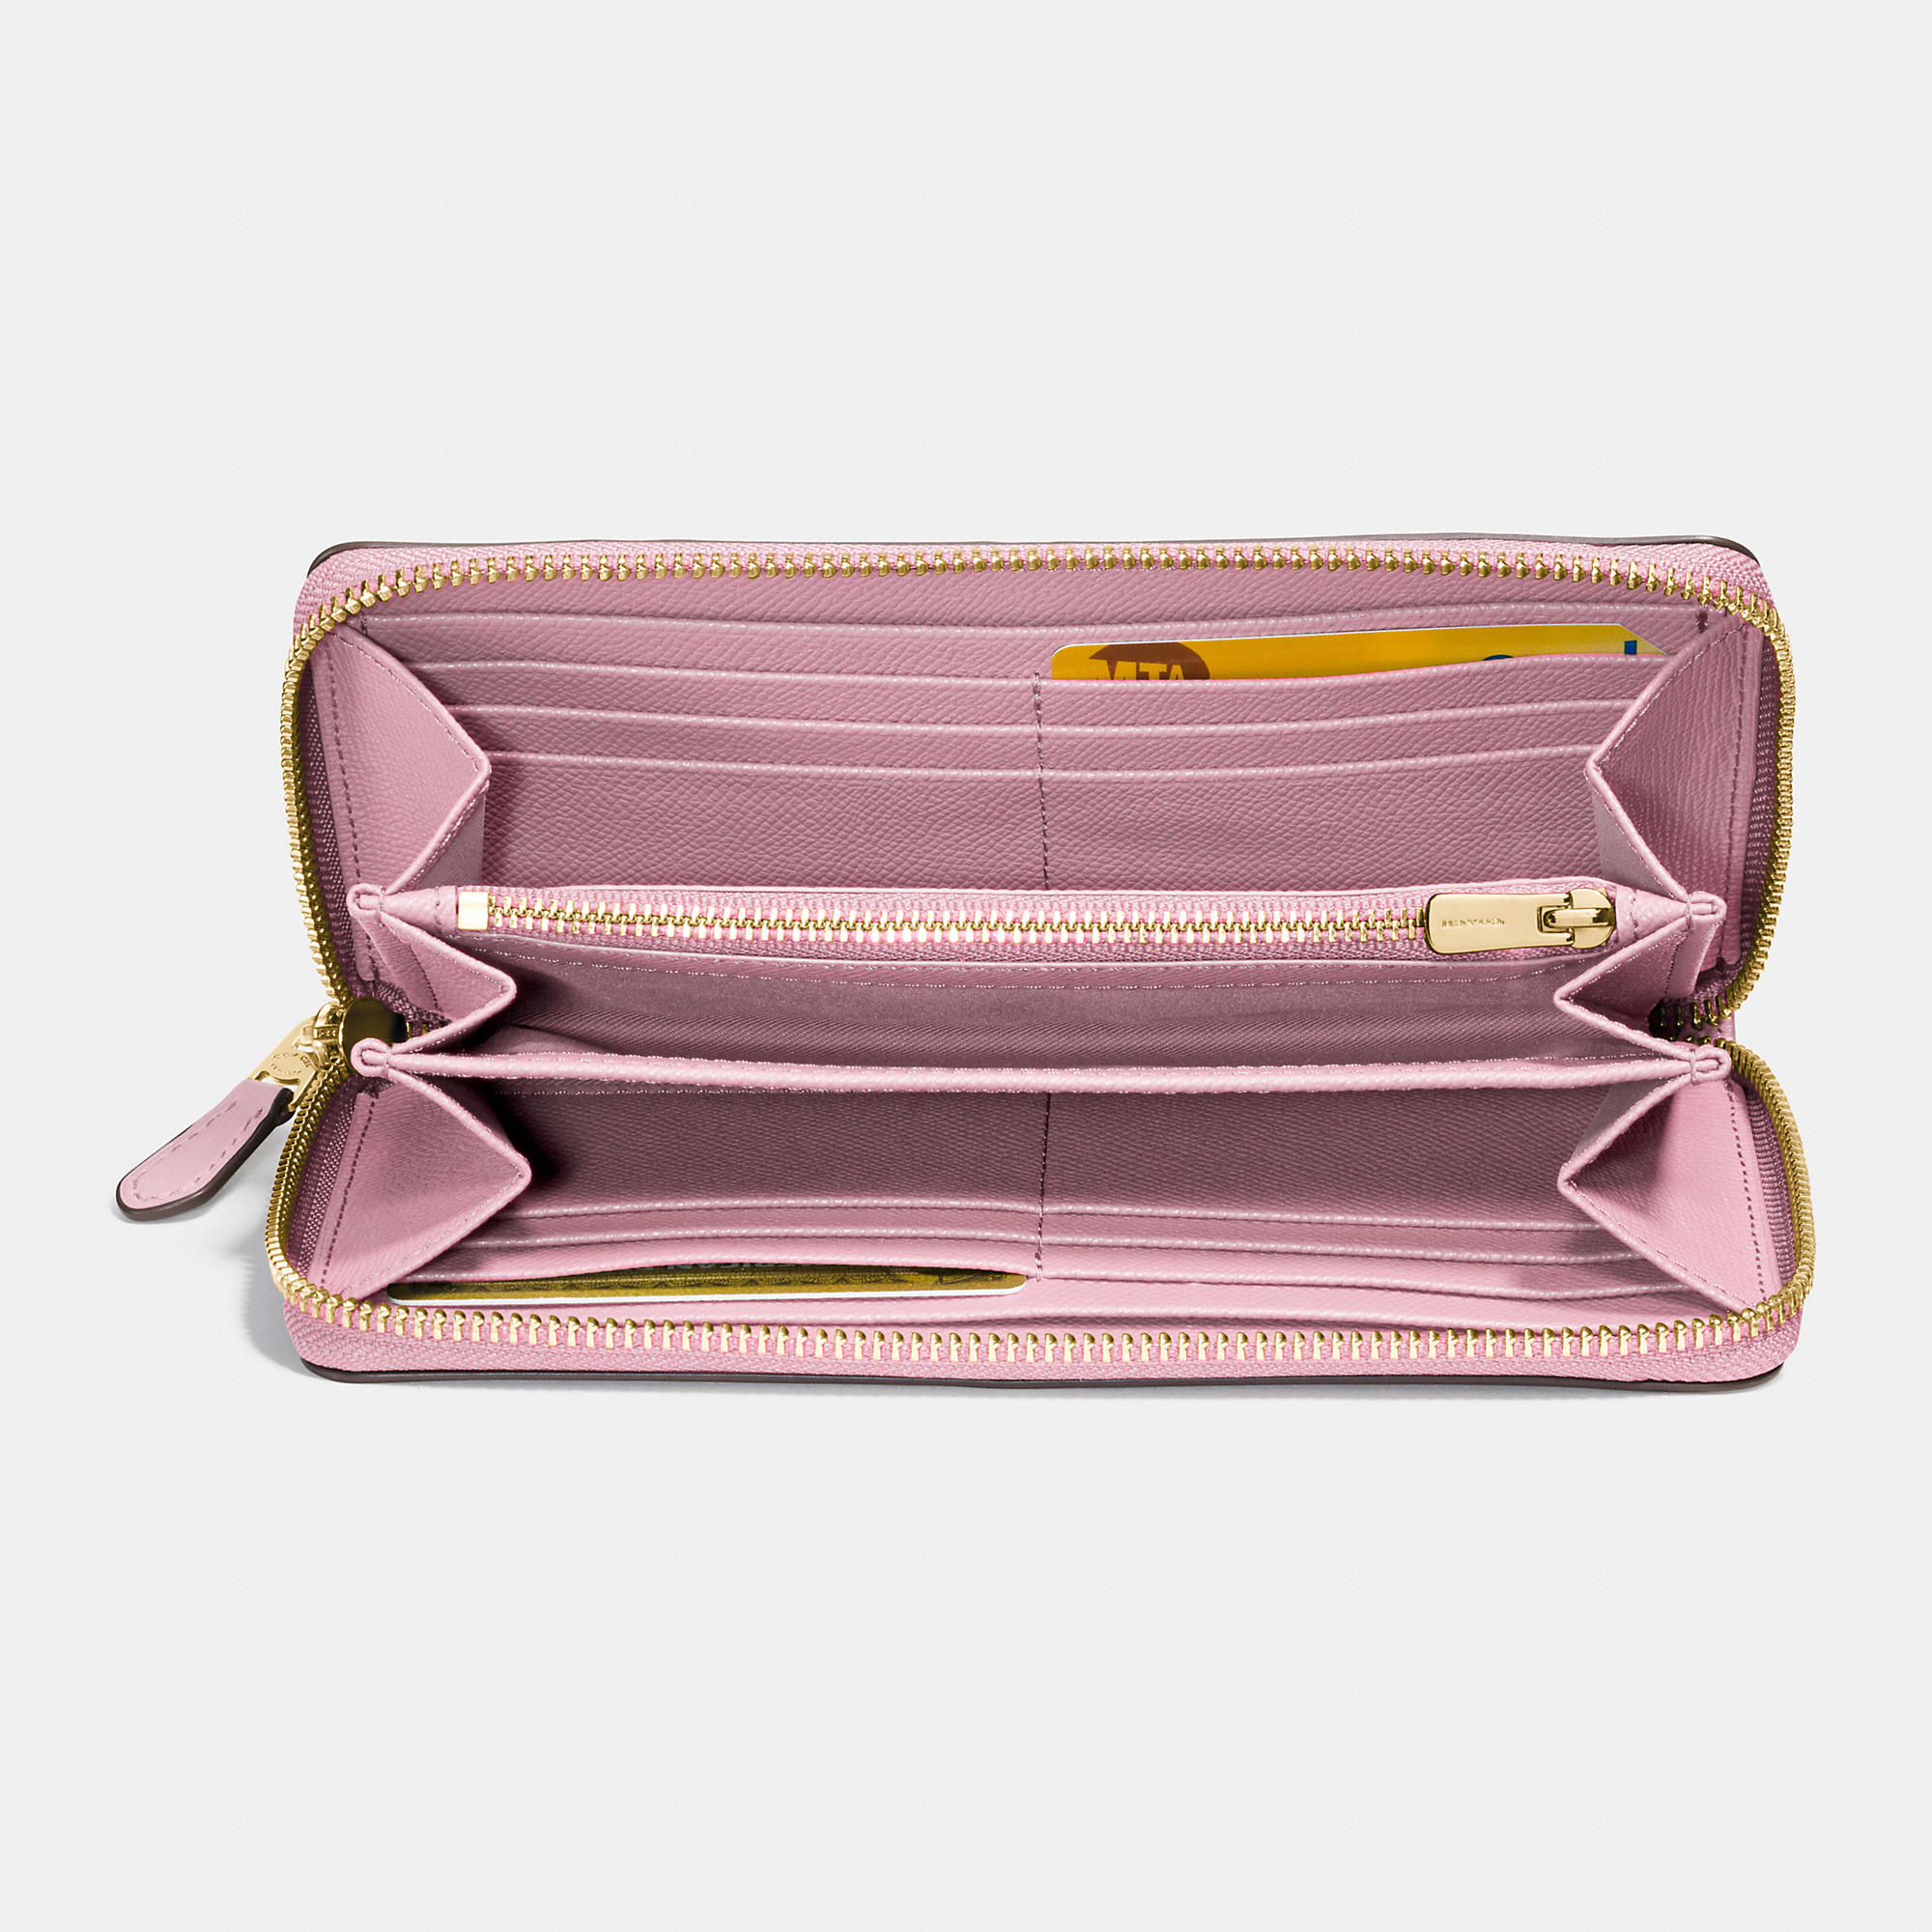 COACH Accordion Zip Wallet In Signature Embossed Leather in Pink